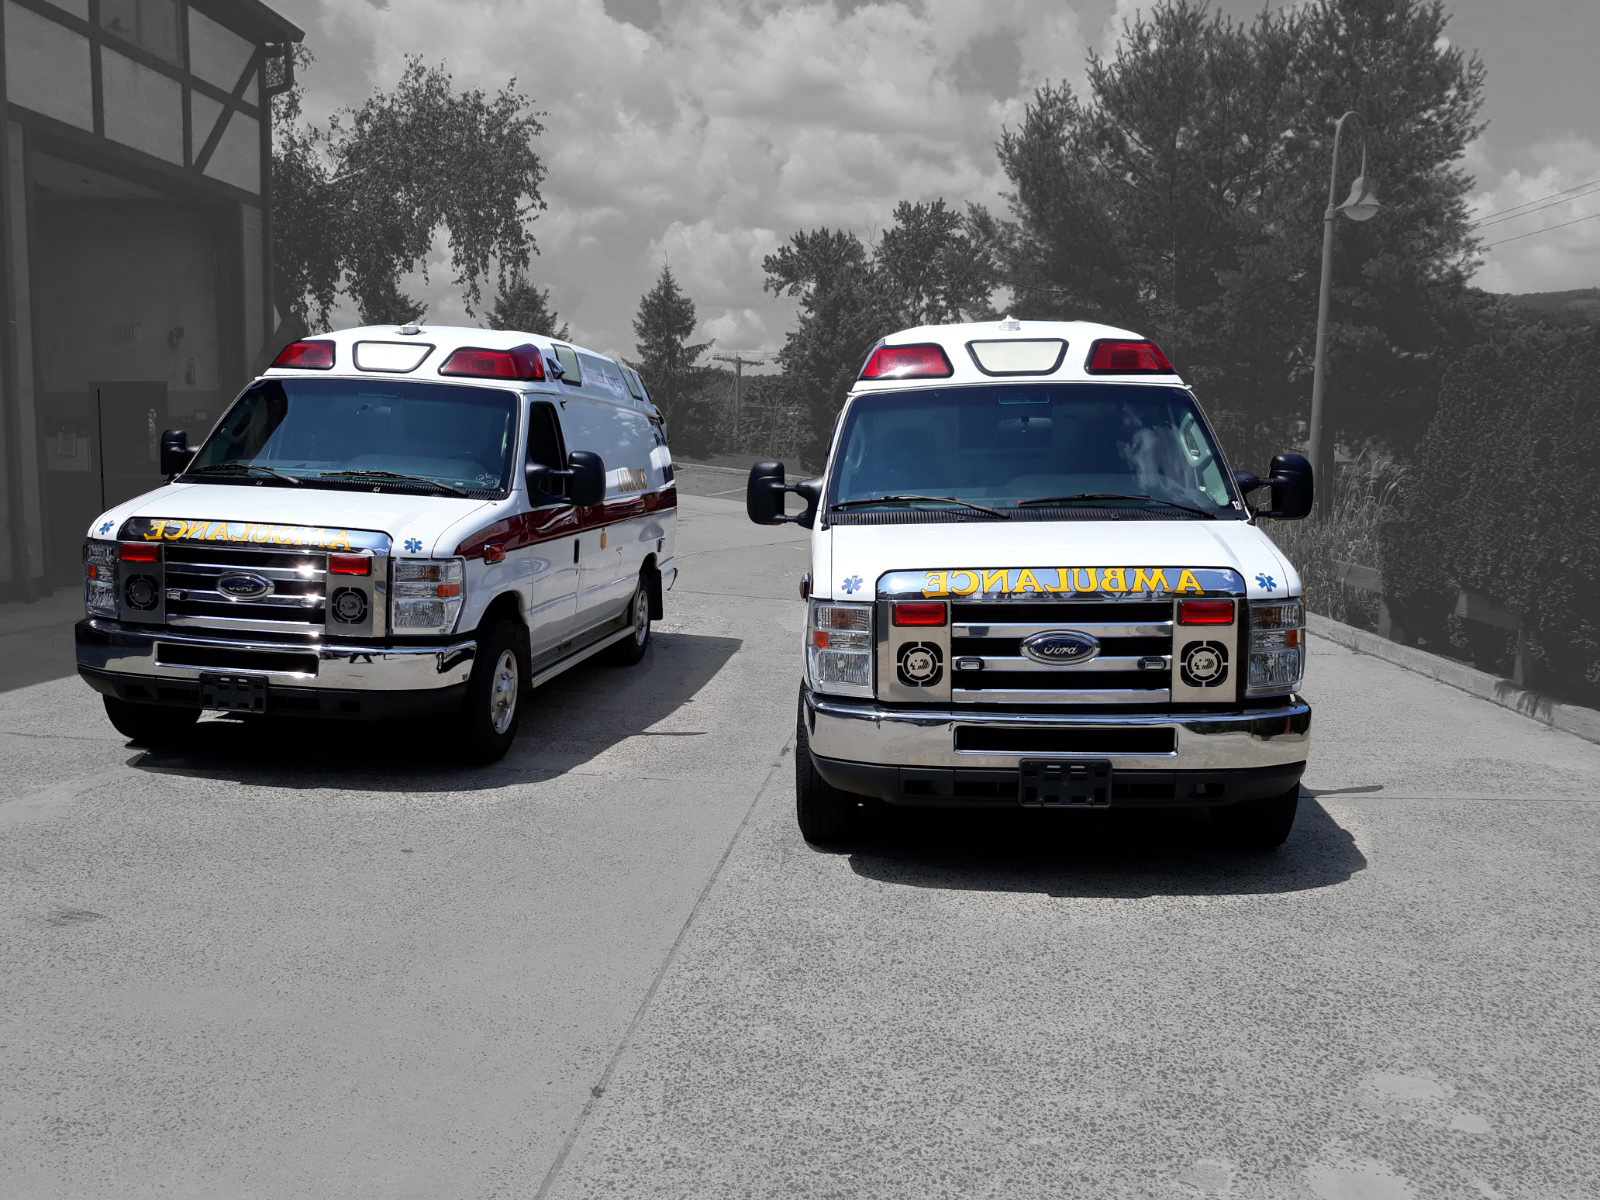 2013 Ford E350 Demers Gas Type 2 Used Ambulance For Sale 01